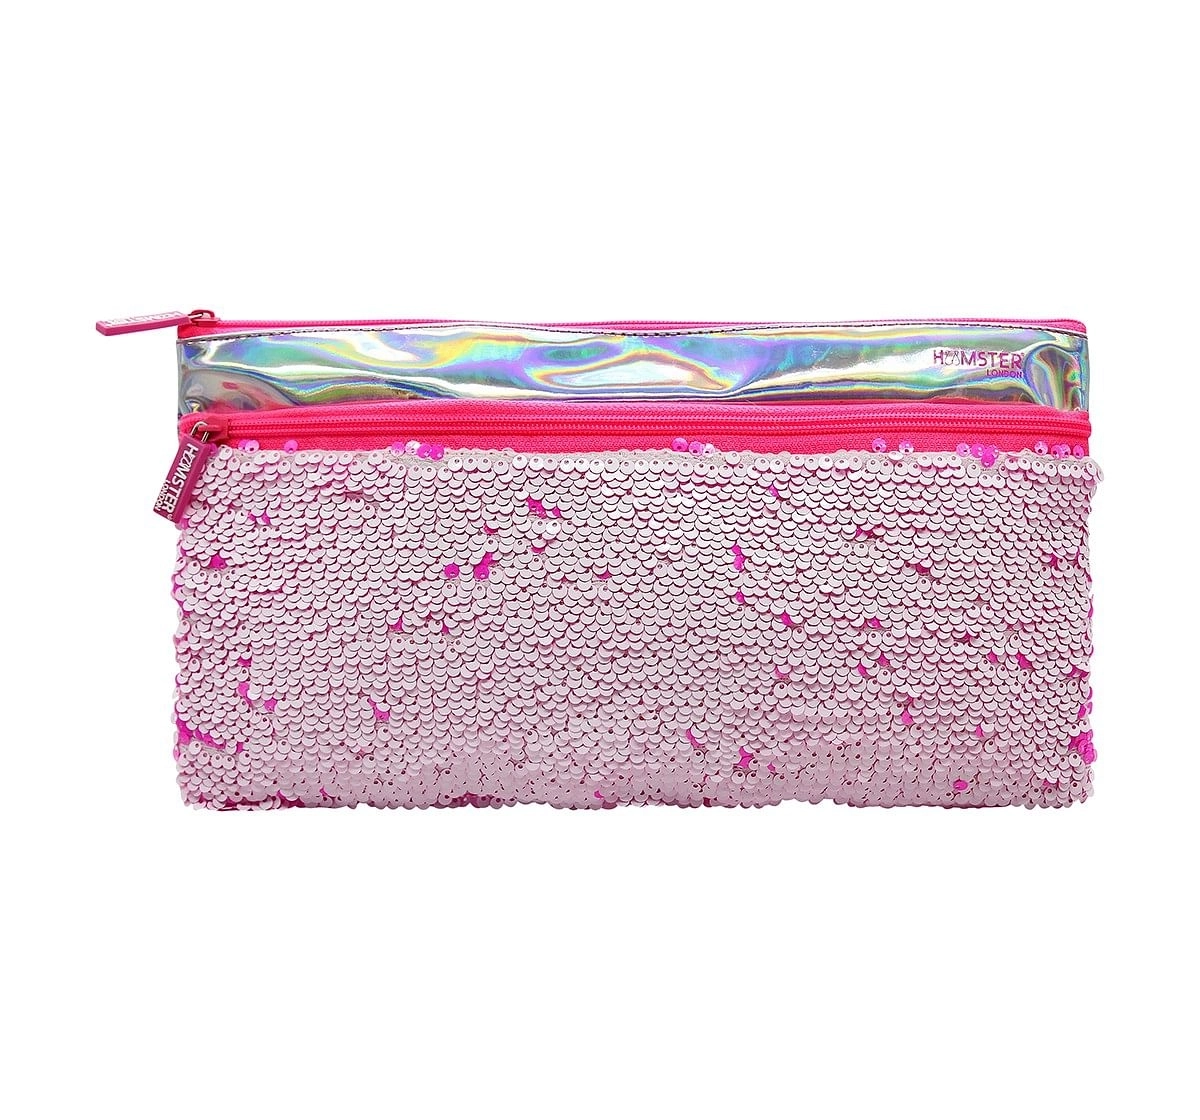 Hamster London Llama Sequin Pouch for age 3Y+ (Pink)